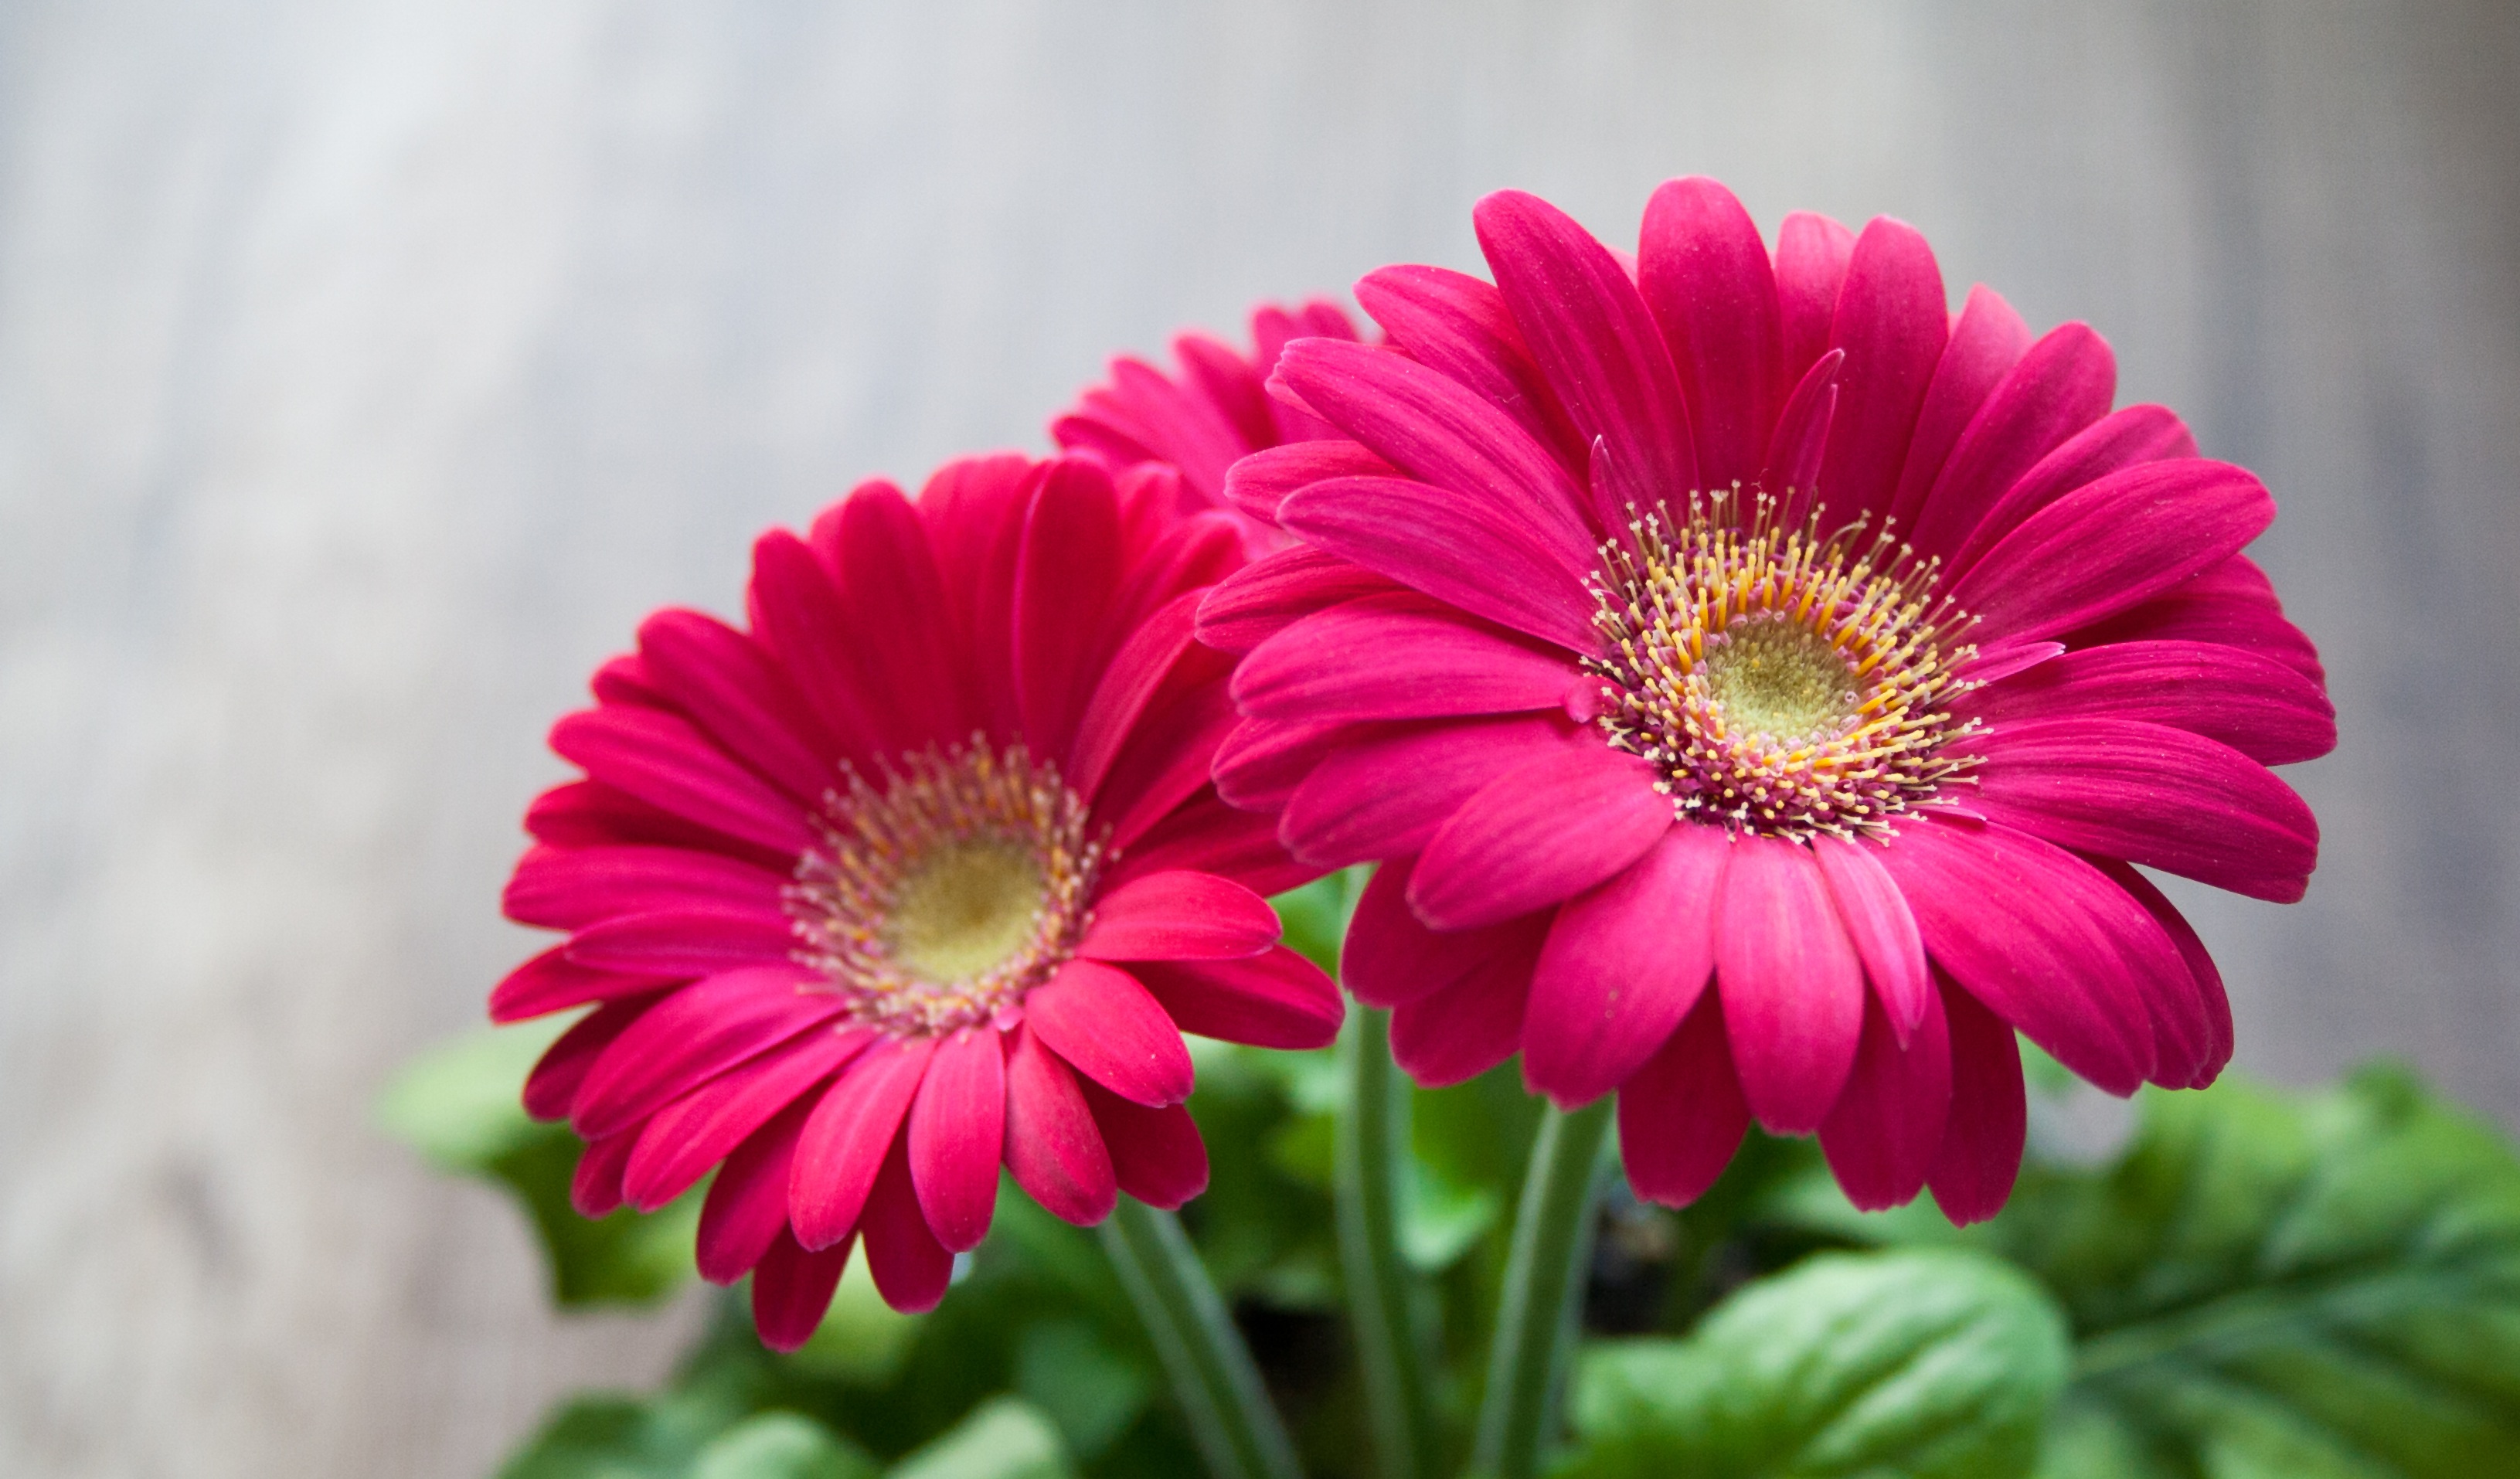 Wallpapers daisy pink daisy family on the desktop